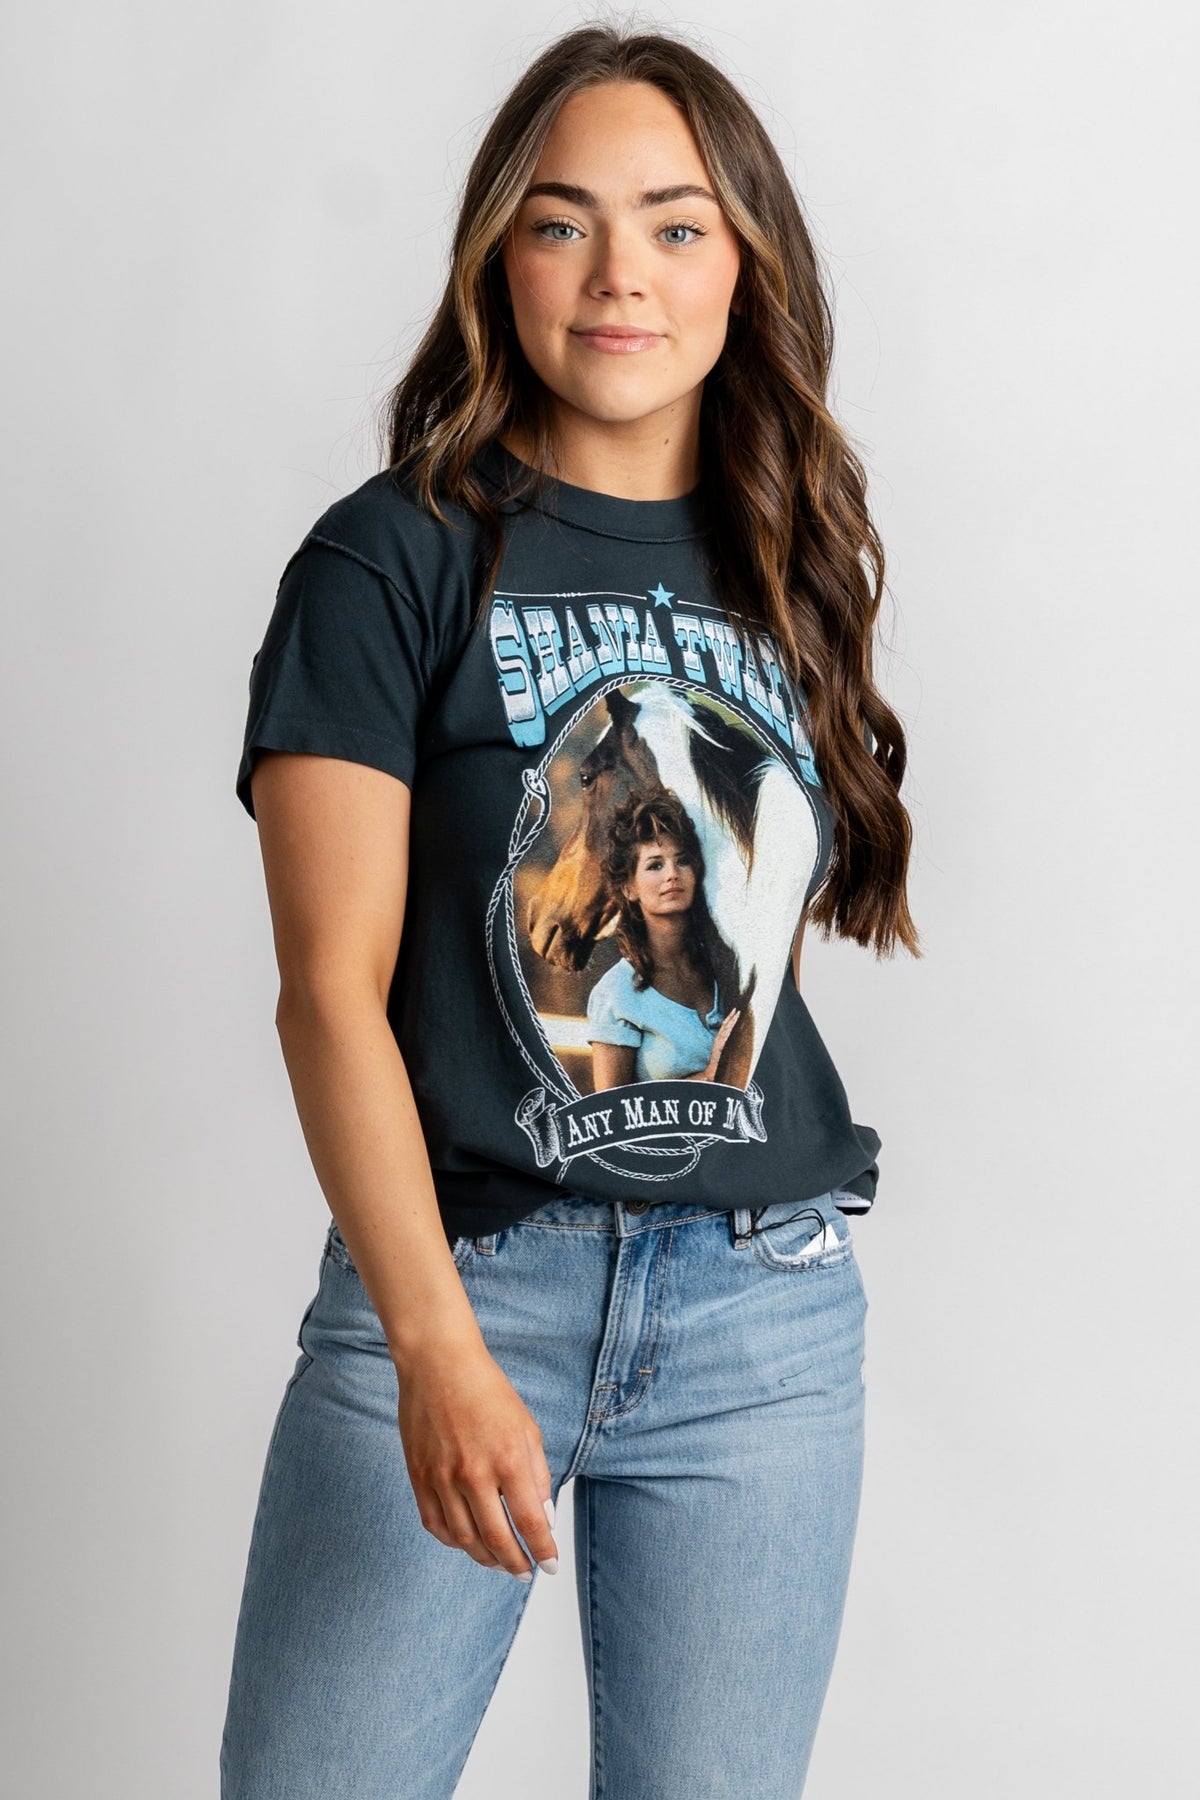 DayDreamer Shania Twain any man of mine tee vintage black - DayDreamer Graphic Band Tees at Lush Fashion Lounge Trendy Boutique in Oklahoma City